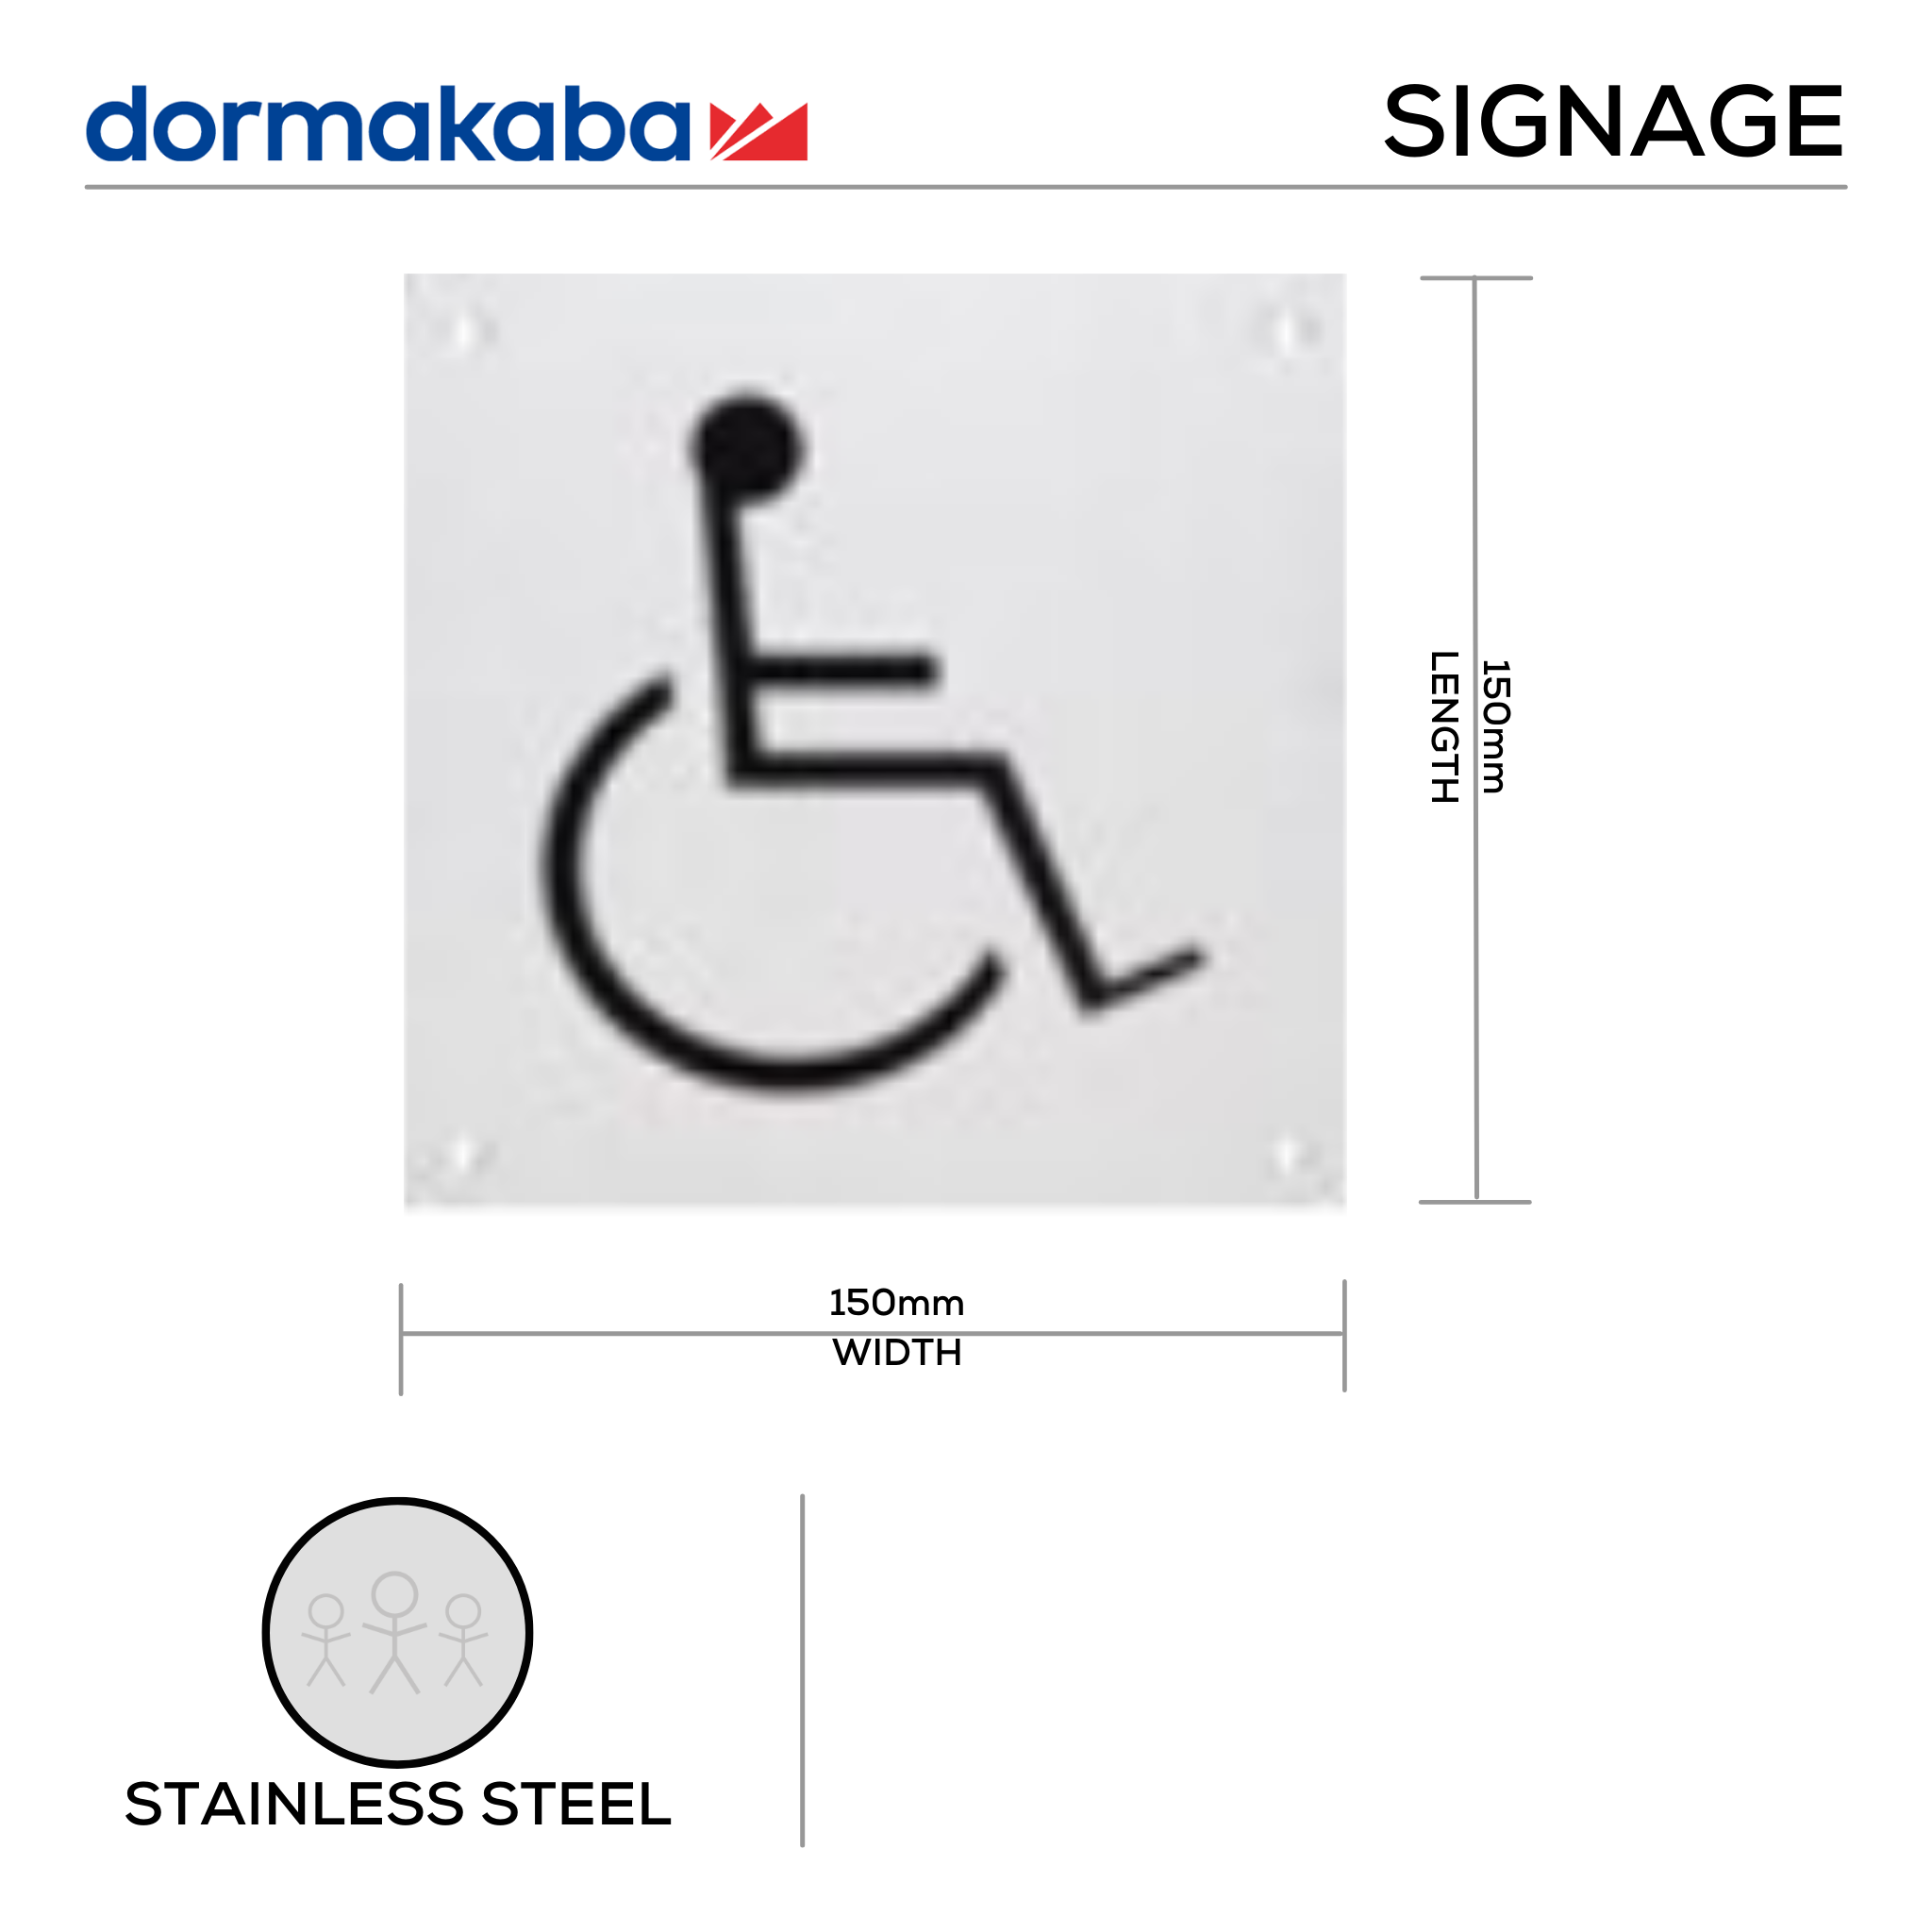 DSS-133, Door Signage, Disabled , 150mm (l), 150mm (w), 1,2mm (t), Stainless Steel, DORMAKABA